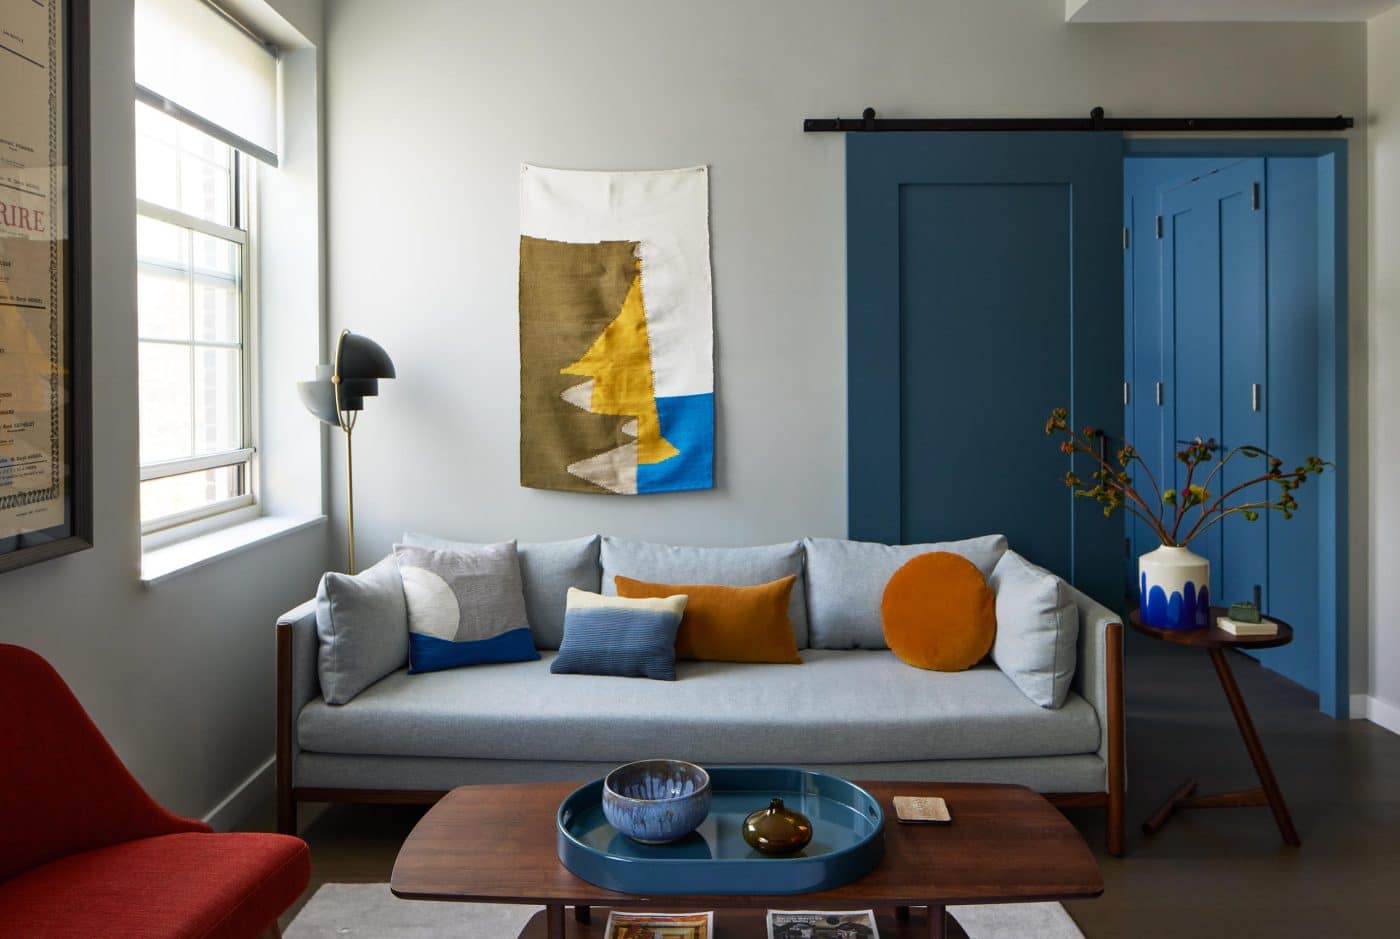 The living room of an apartment interior designer Nina Barnieh-Blair worked on in Brooklyn 